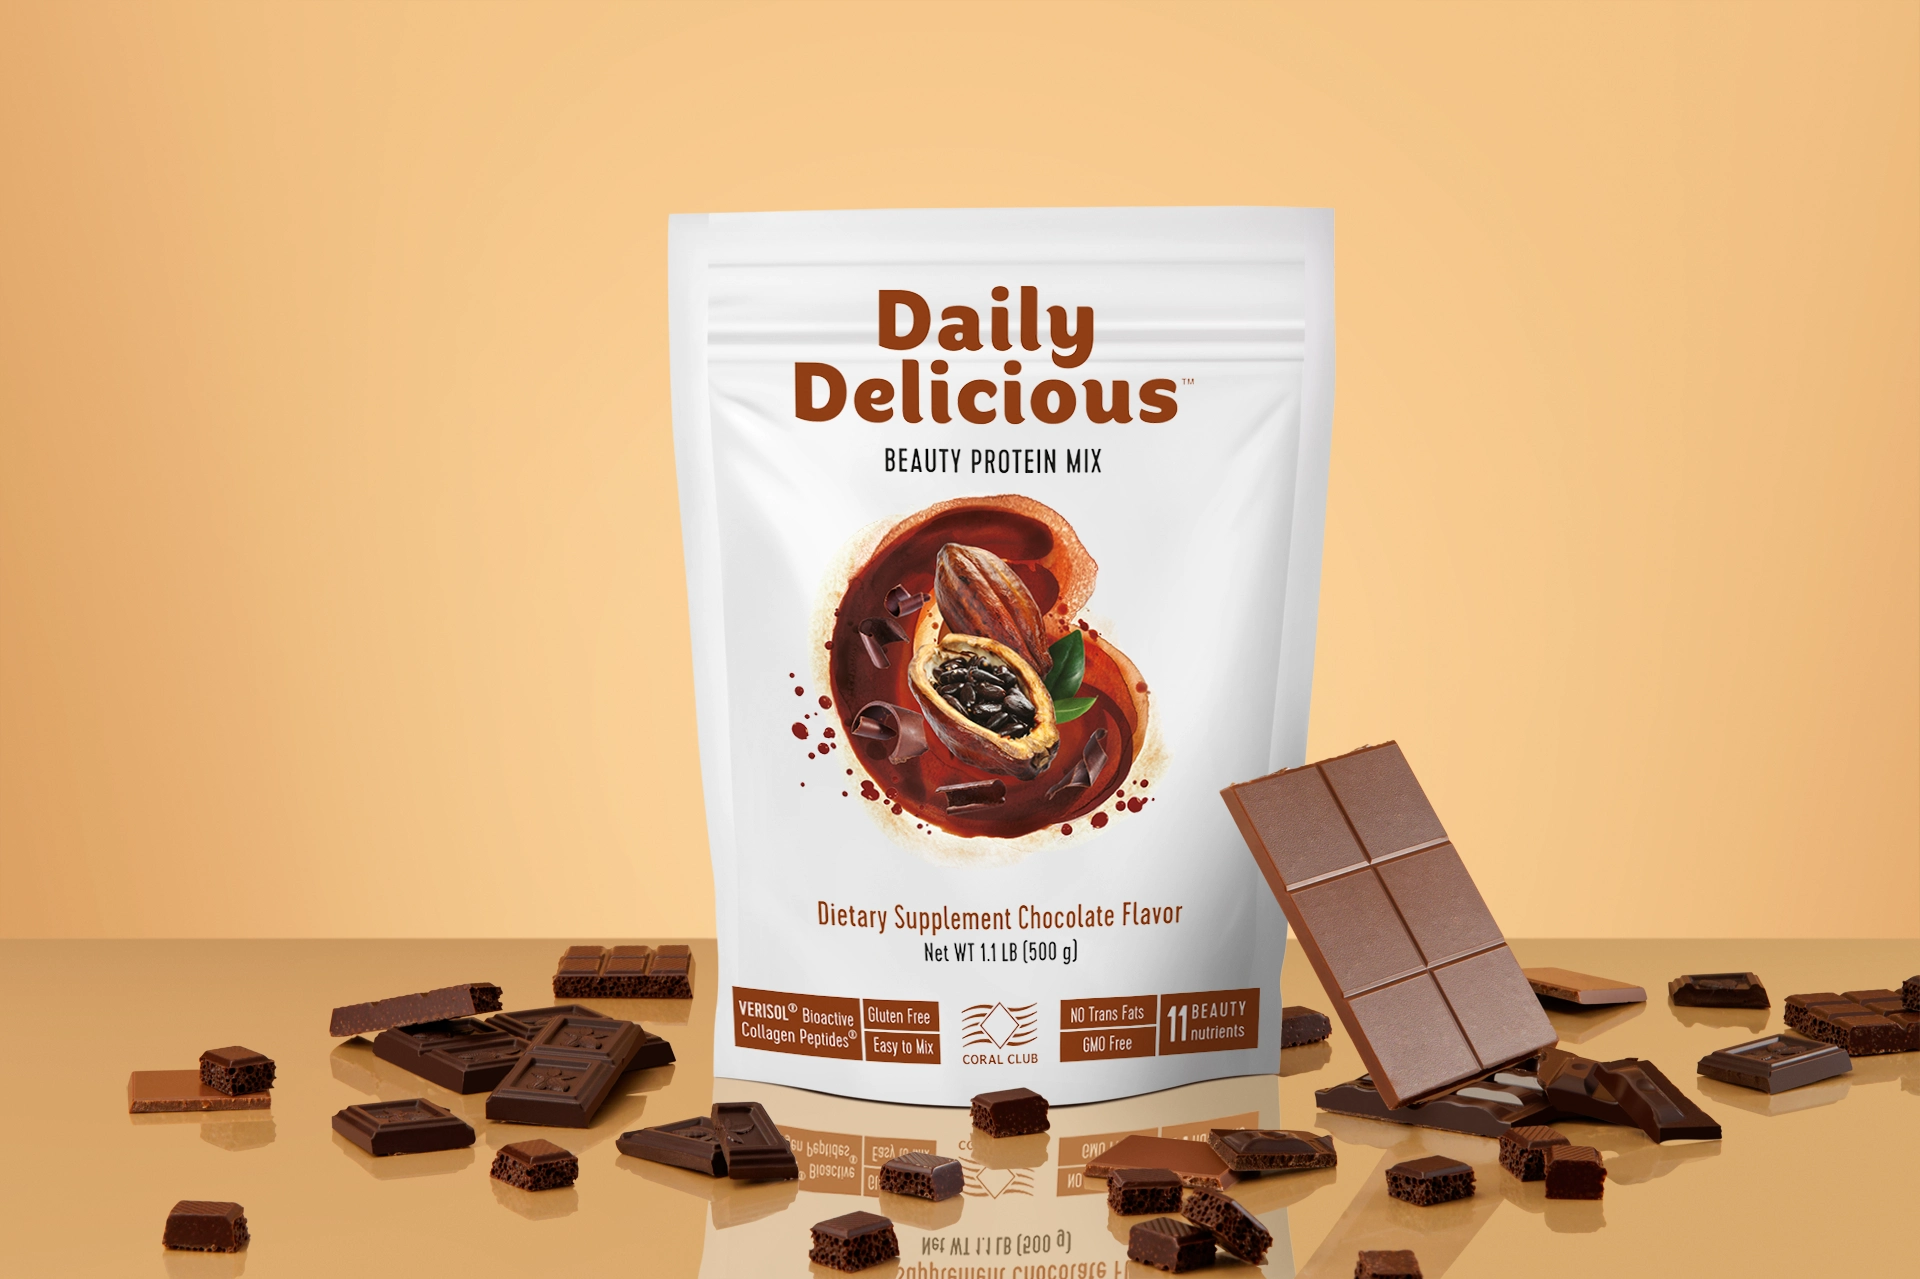 Daily Delicious Beauty Protein Mix Chocolate